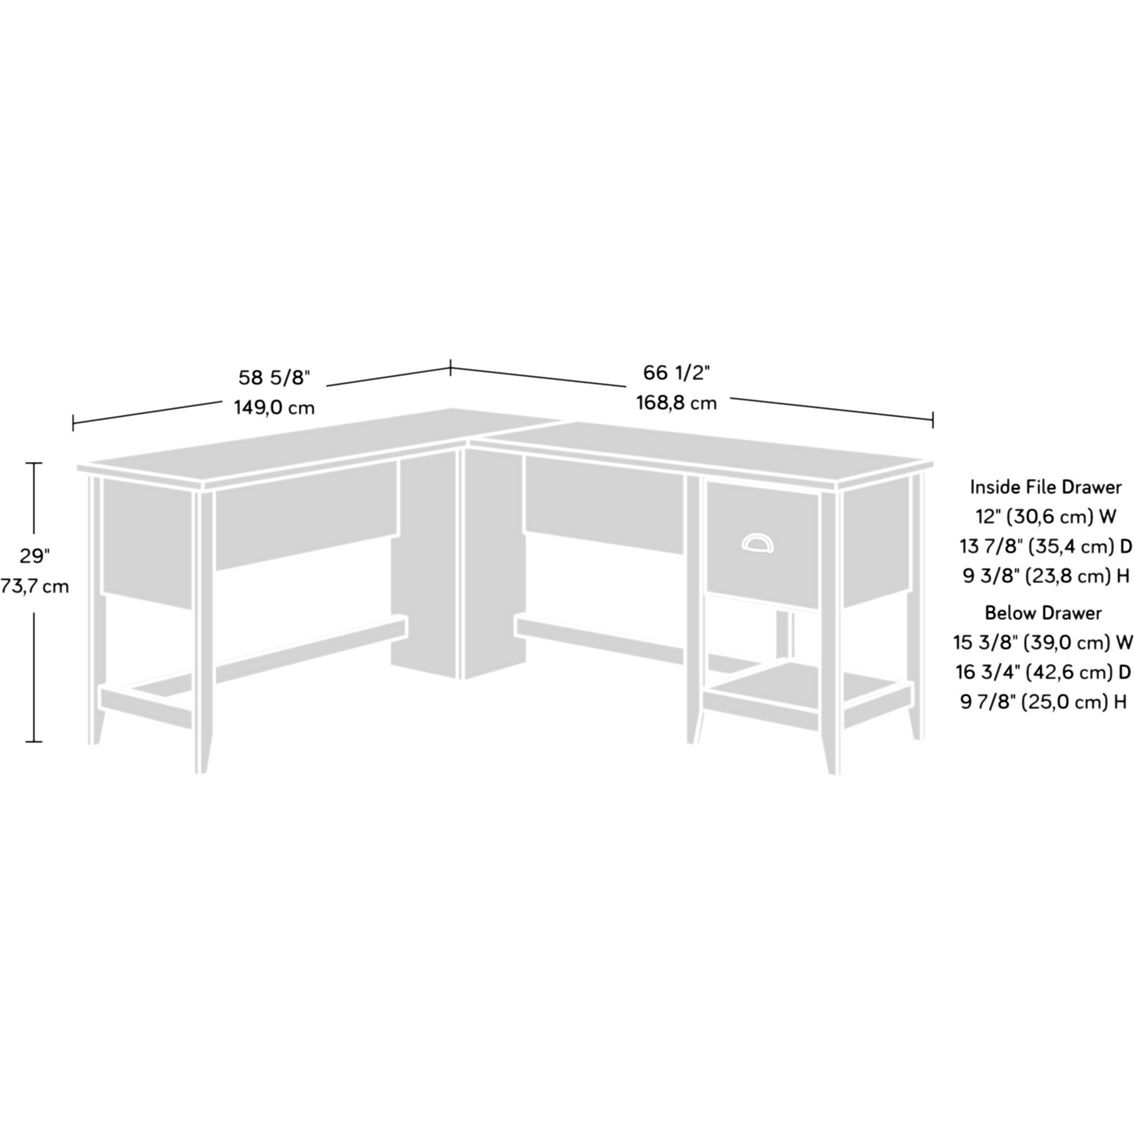 Sauder Summit Station L-Shaped Home Office Desk with Drawer - Image 3 of 3